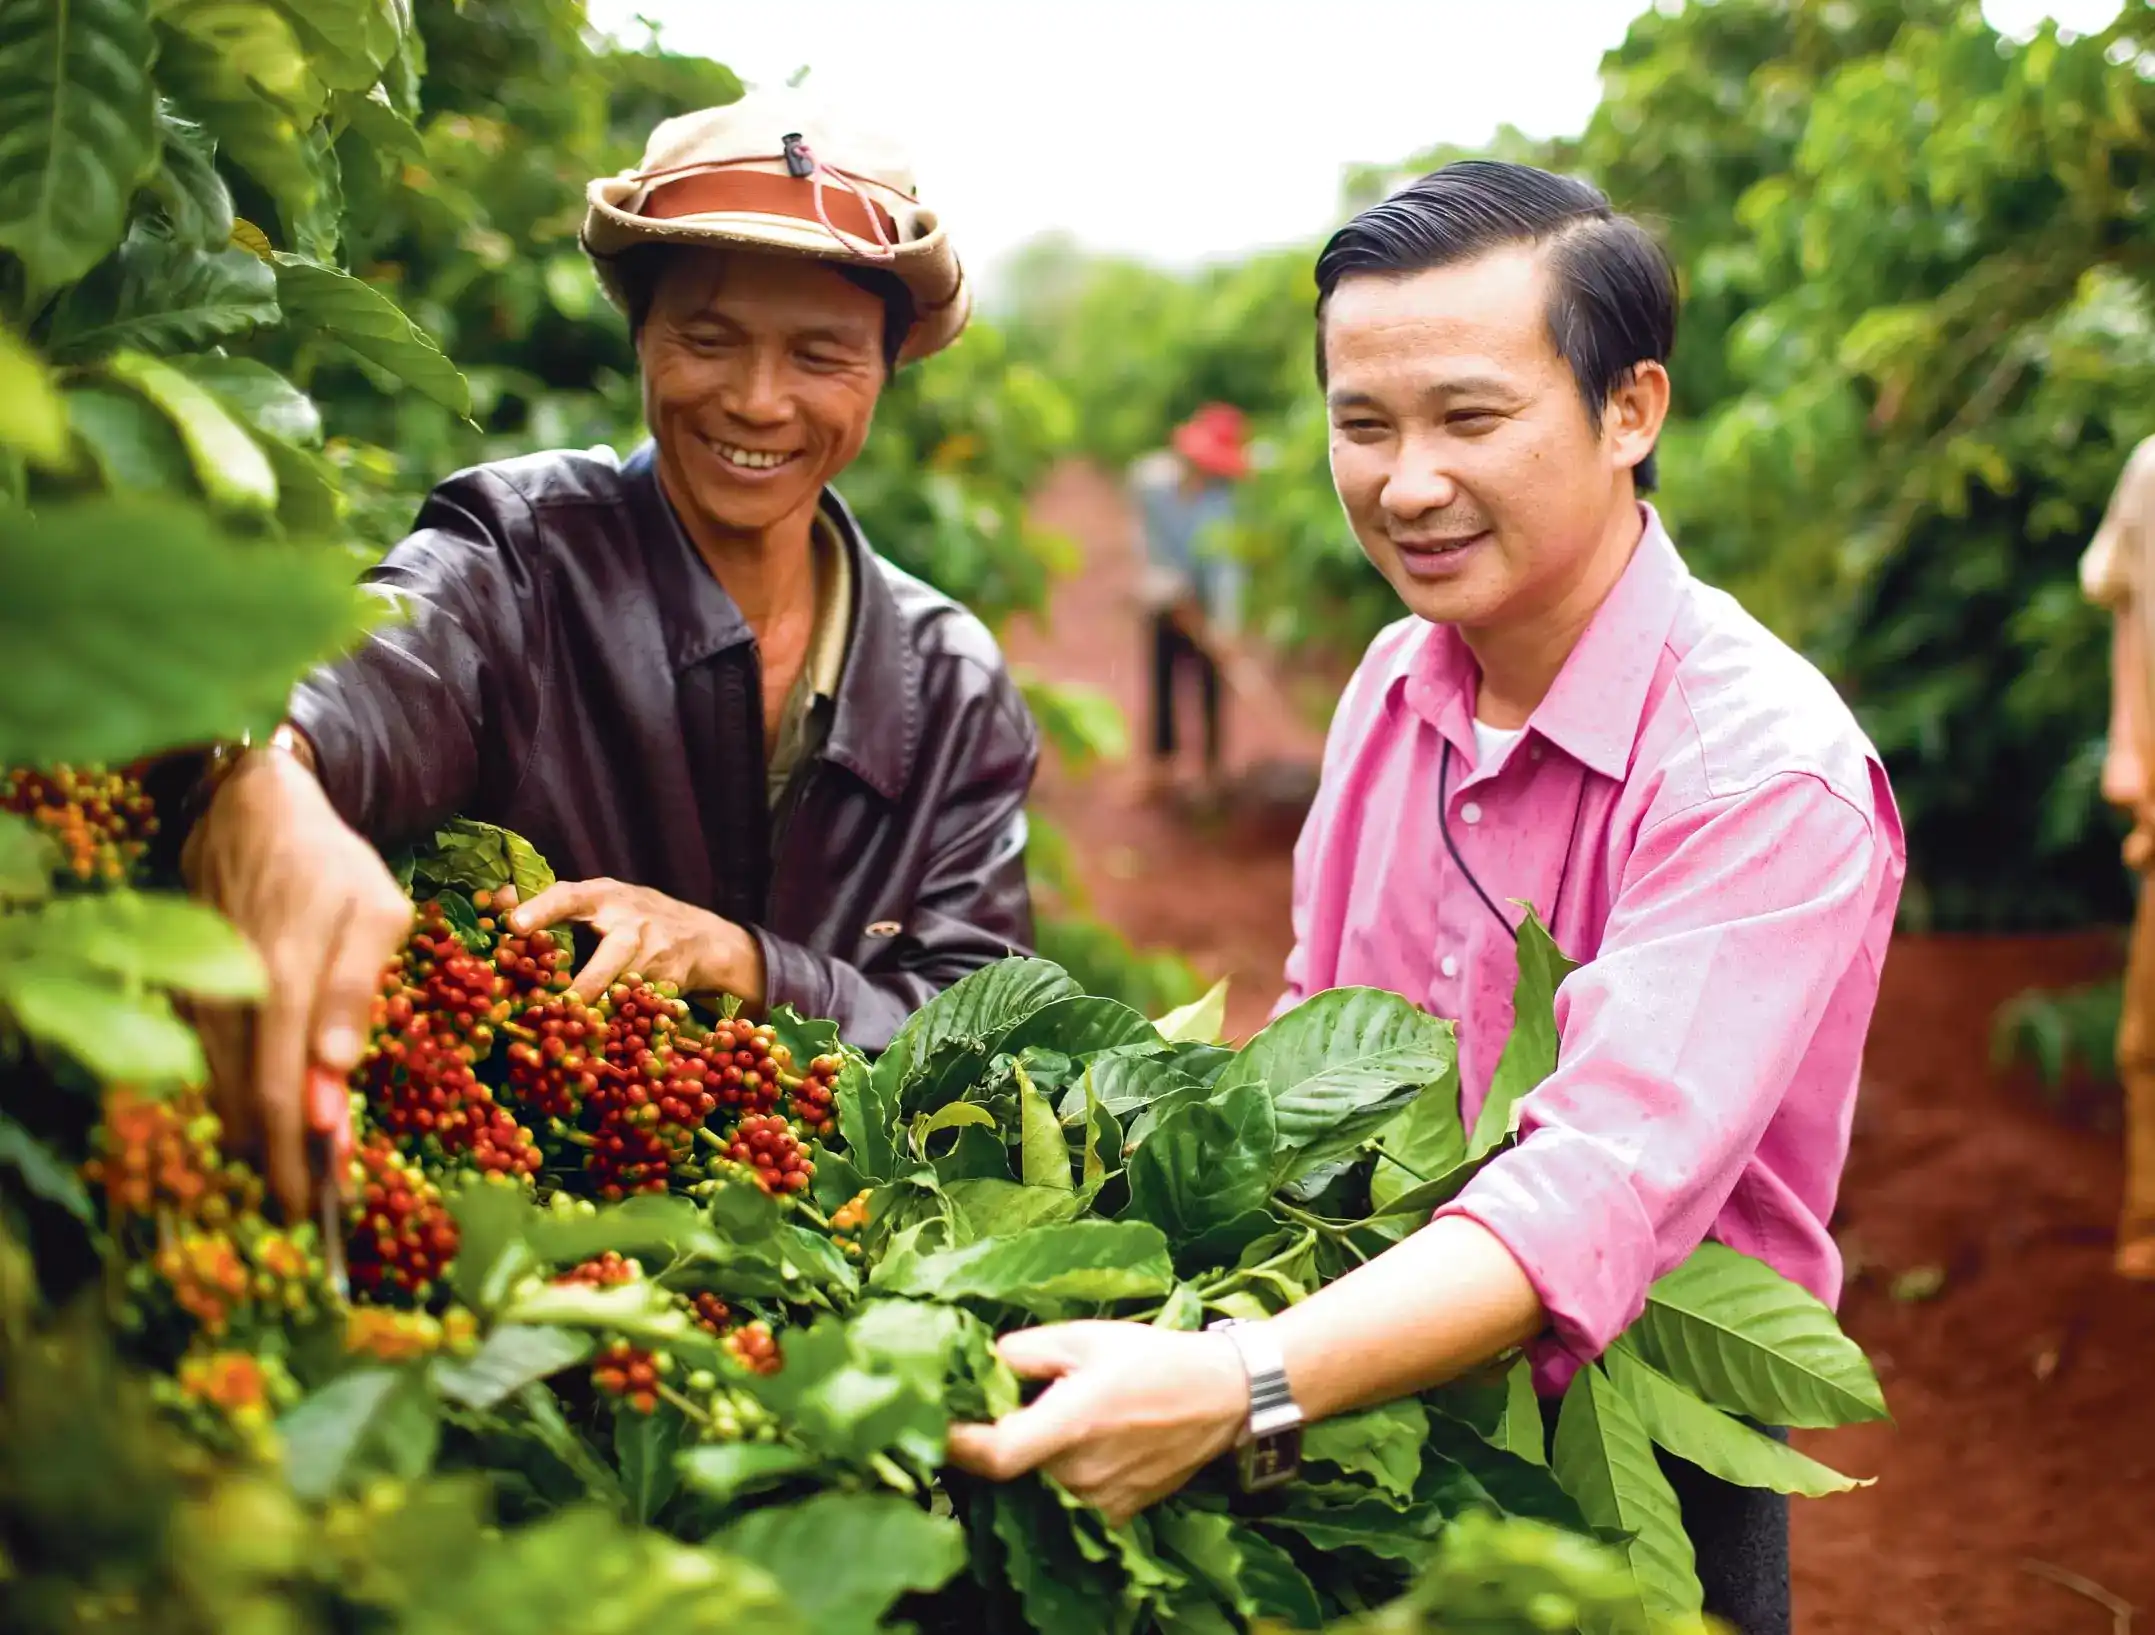 Sourcing coffee beans in Asia